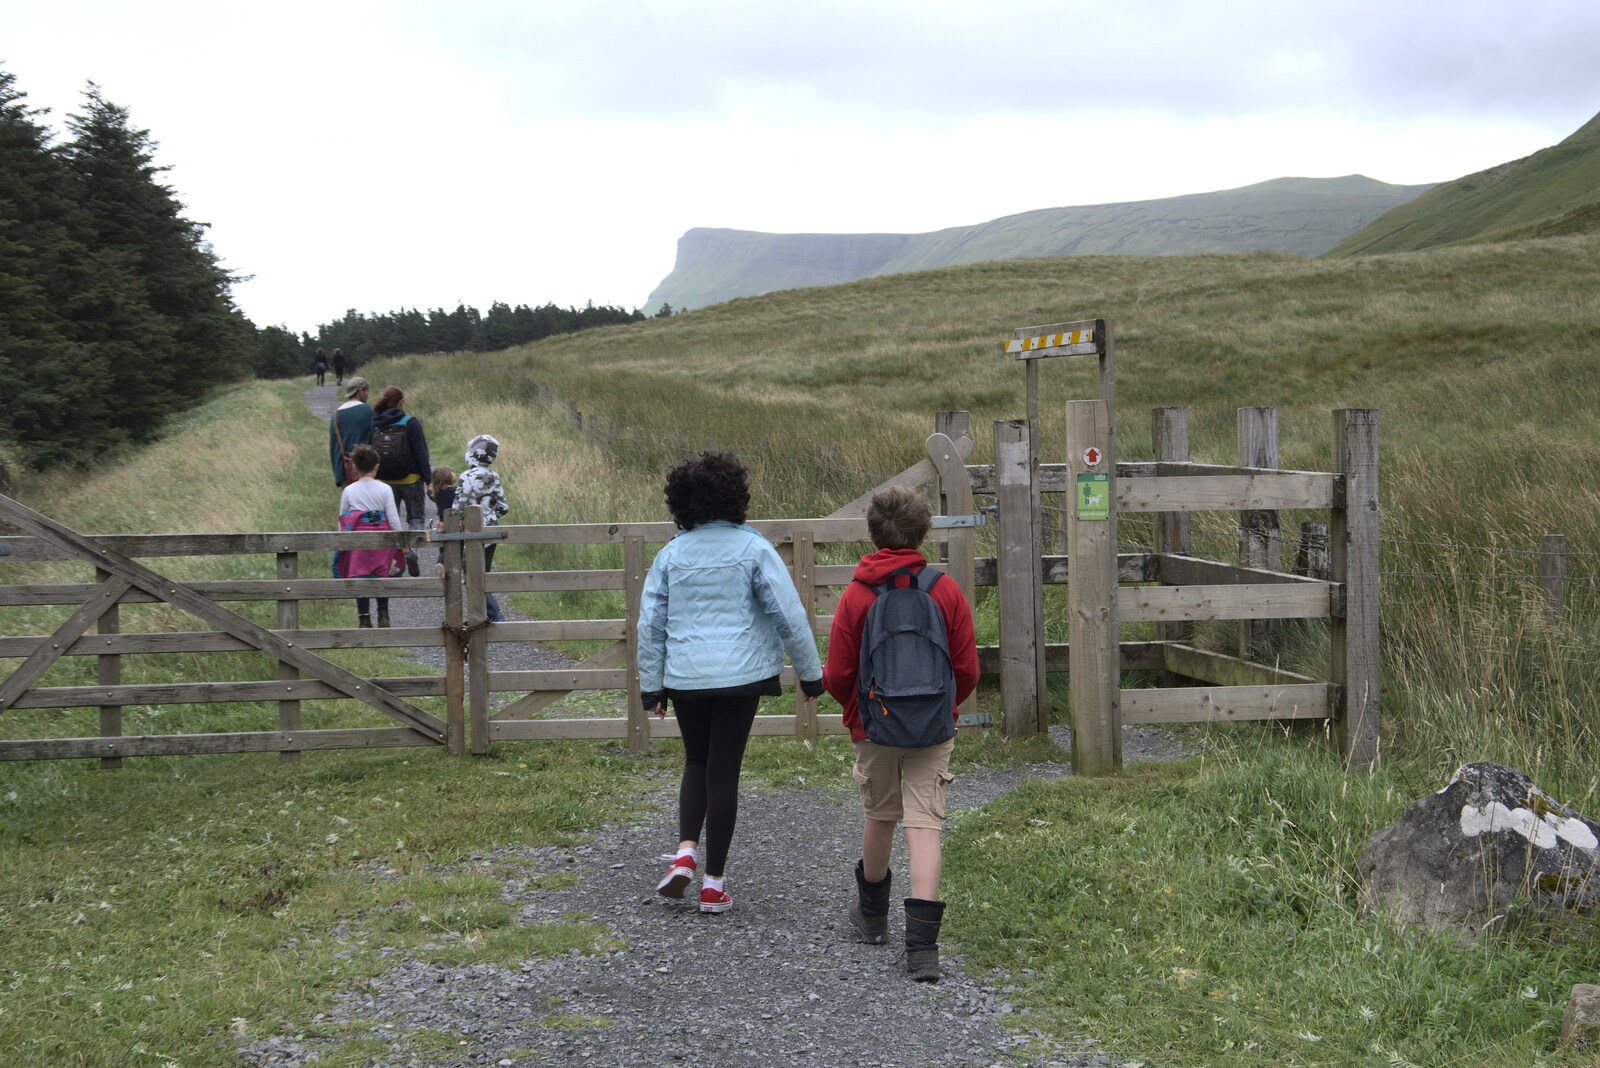 Fern and Fred at a gate from Walks Around Benbulben and Carrowmore, County Sligo, Ireland - 13th August 2021